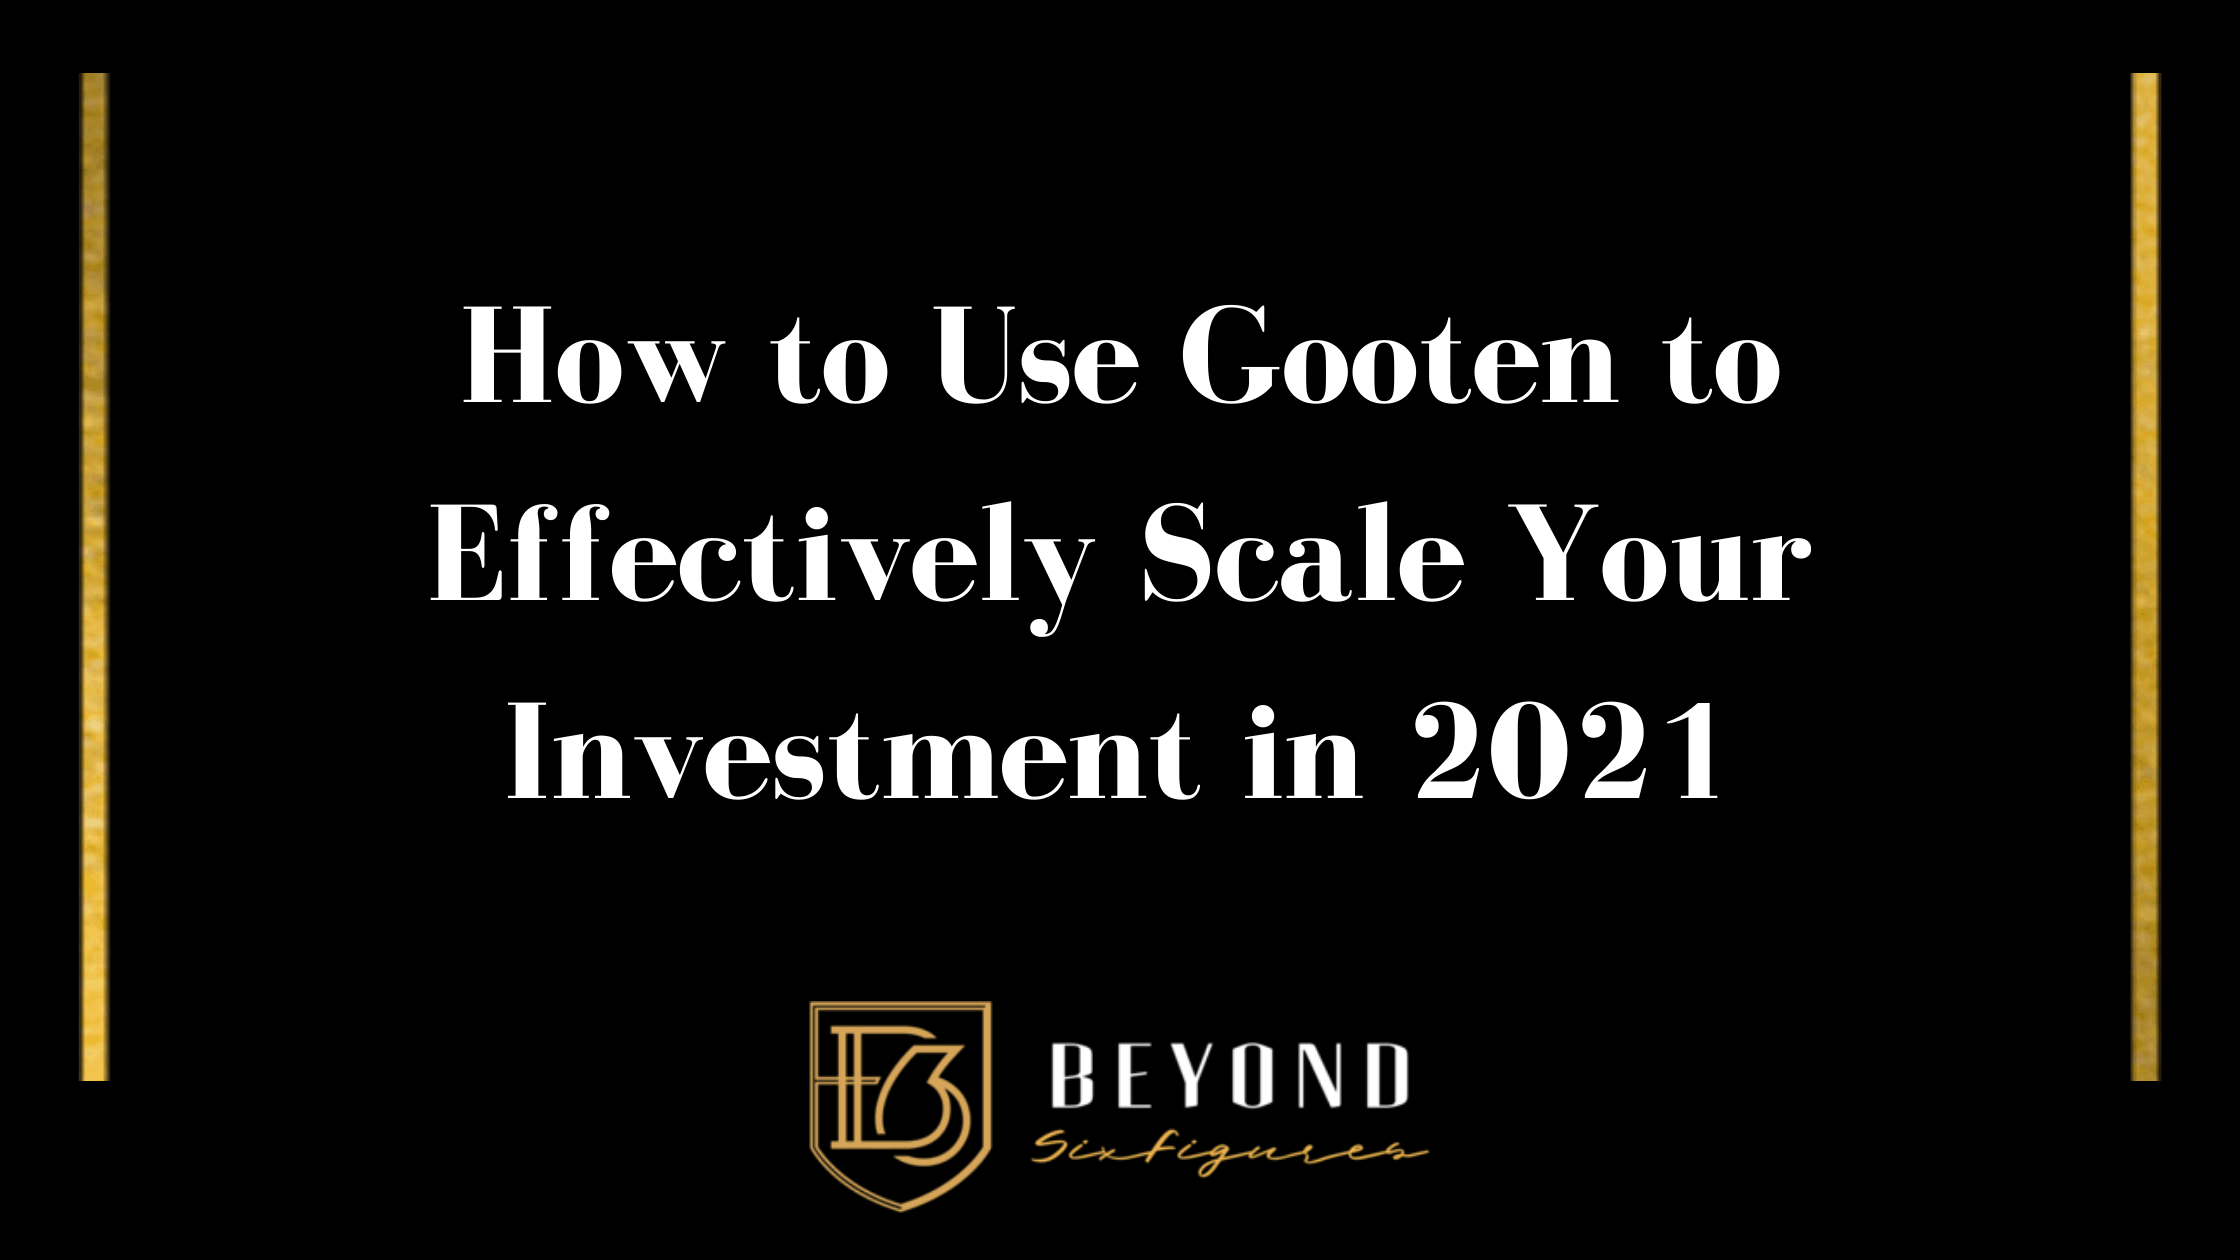 Banner reads: How to Use Gooten to Effectively Scale Your Investment in 2021